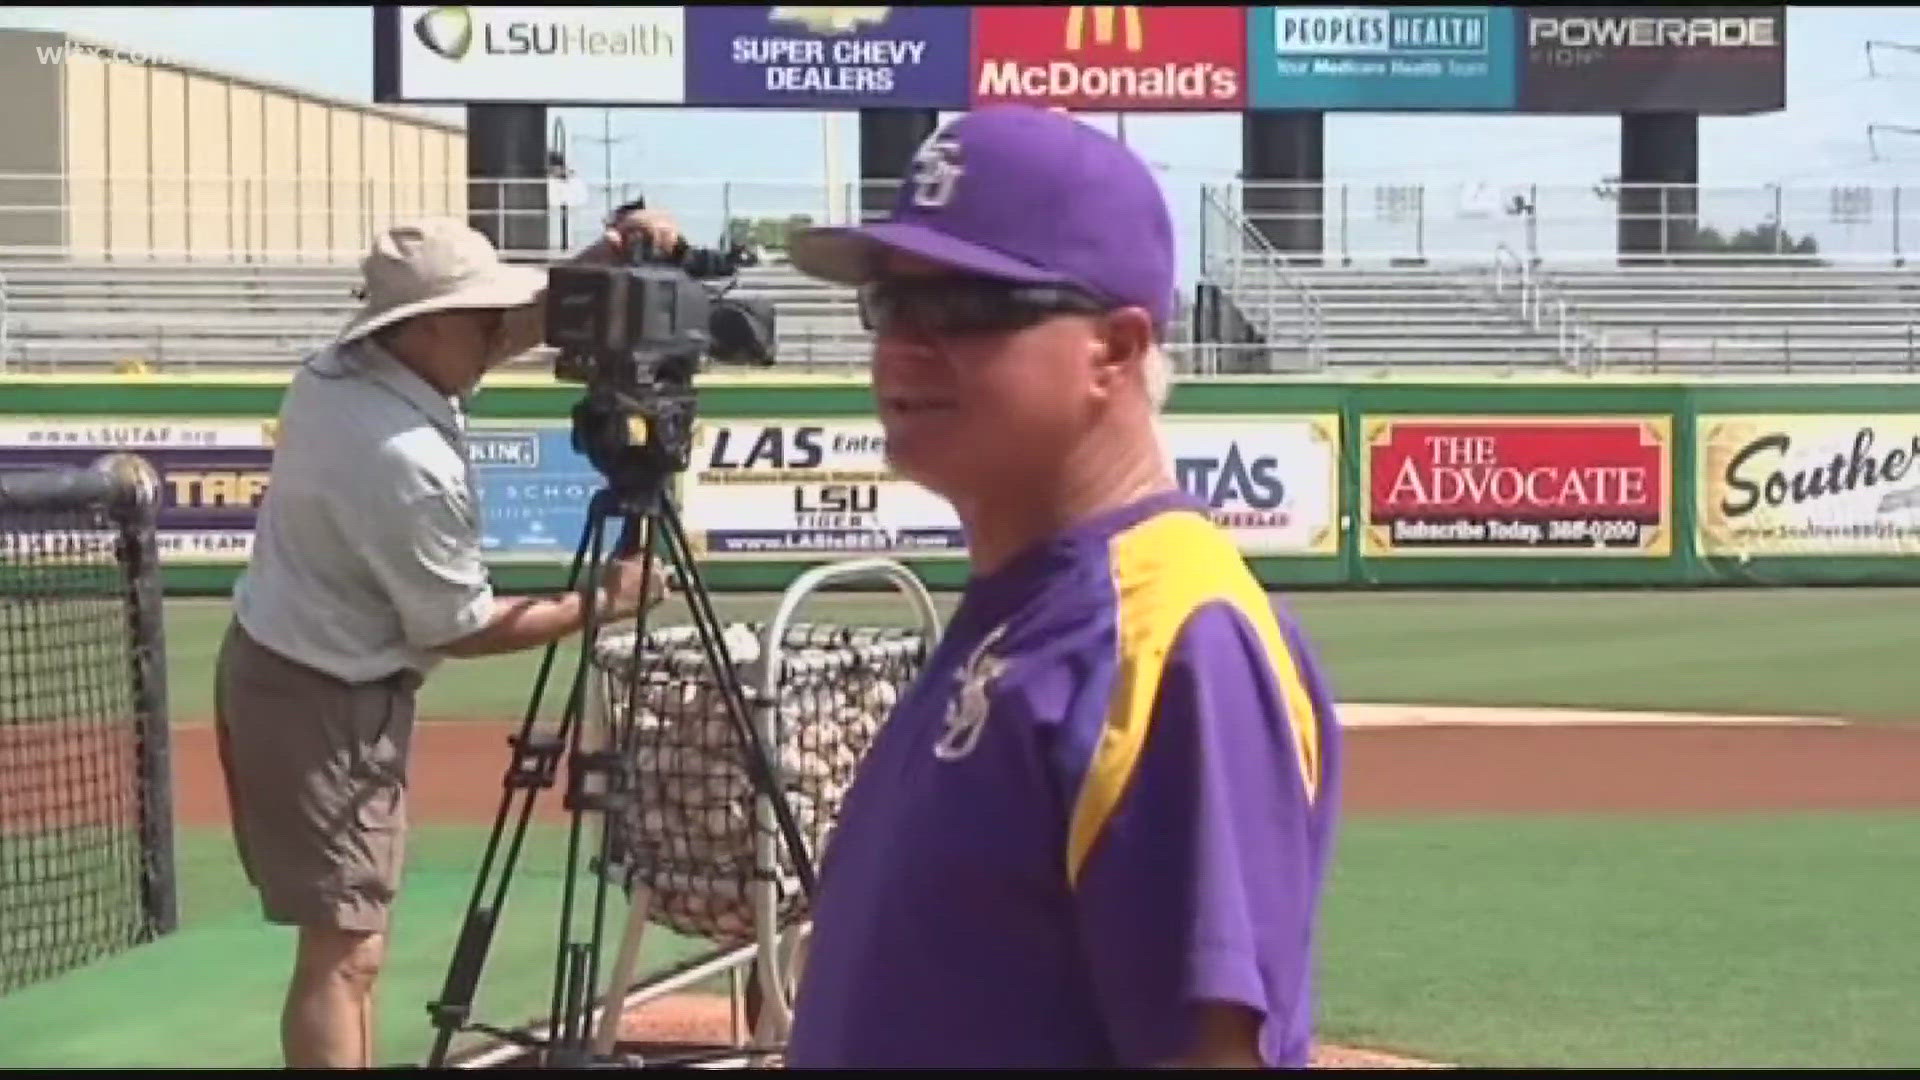 No stranger to taking teams to Omaha which he did with Notre Dame and LSU, Paul Mainieri is set to take over the Gamecock baseball program.